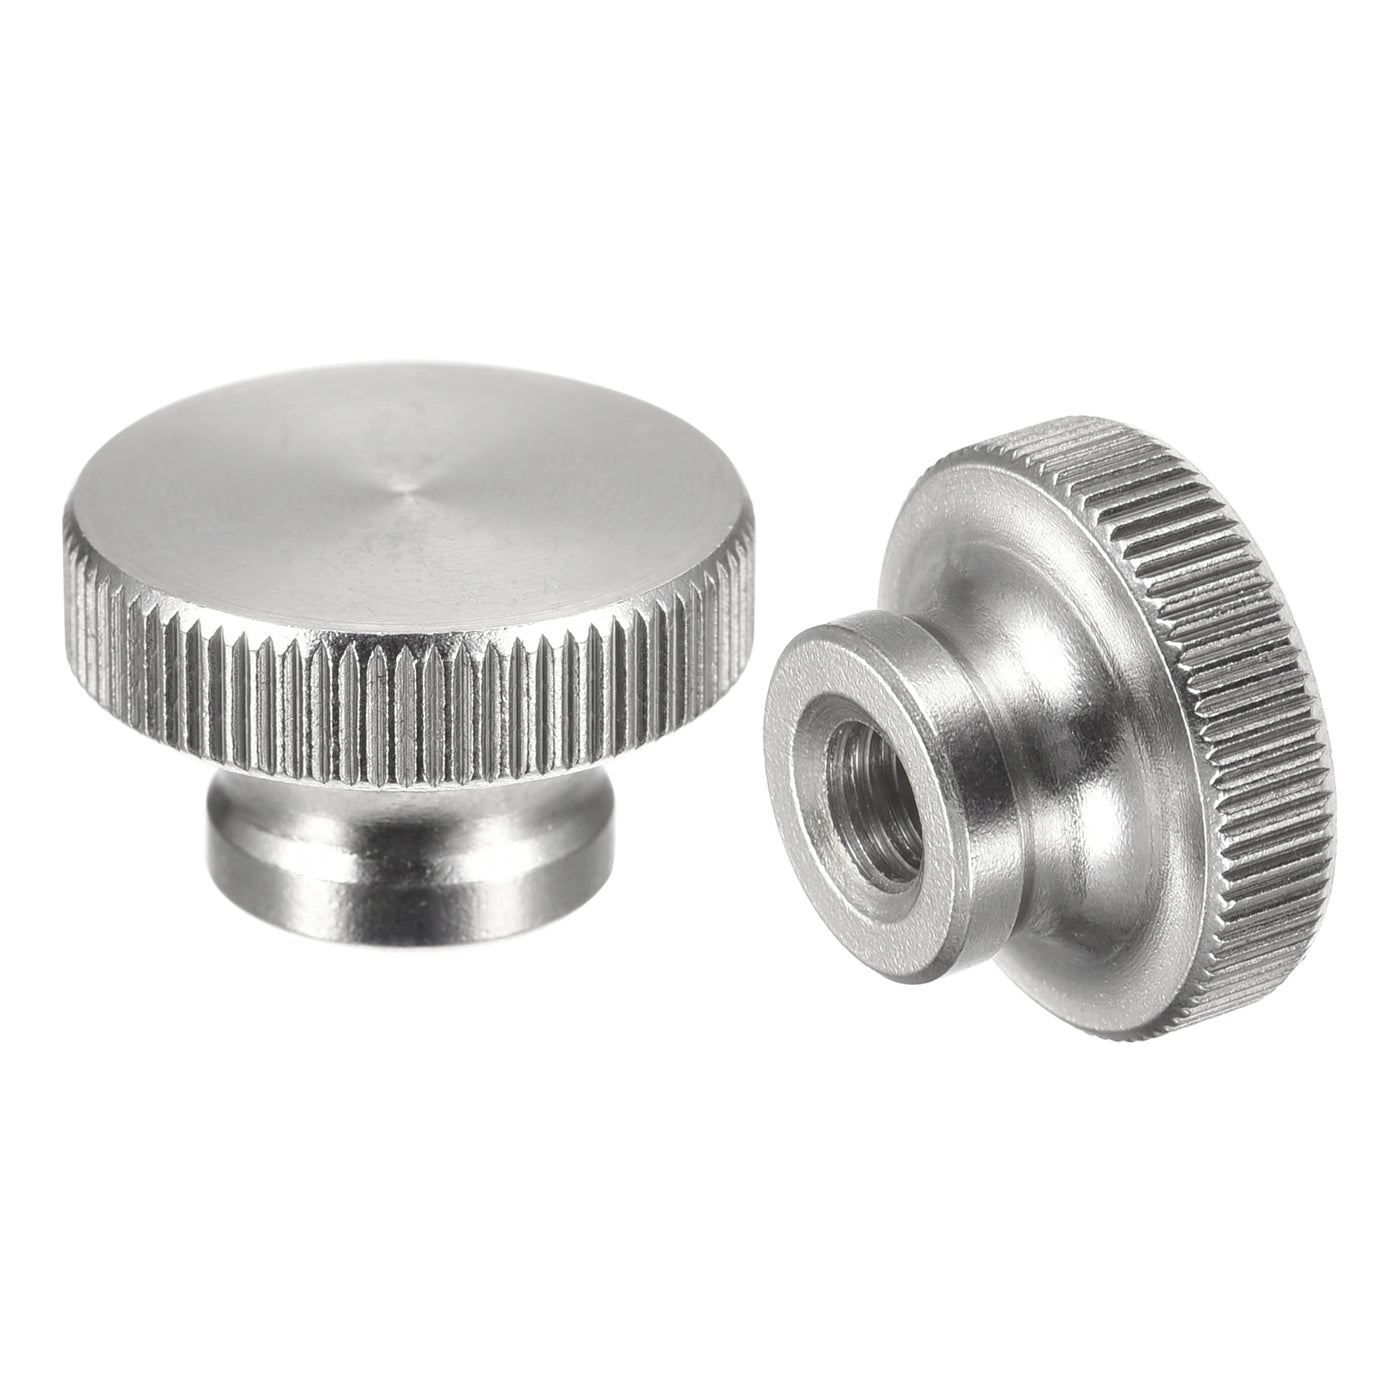 uxcell Uxcell Knurled Thumb Nuts, 2pcs M6 x D20mm x H12mm 304 Stainless Steel Blind Hole Nuts